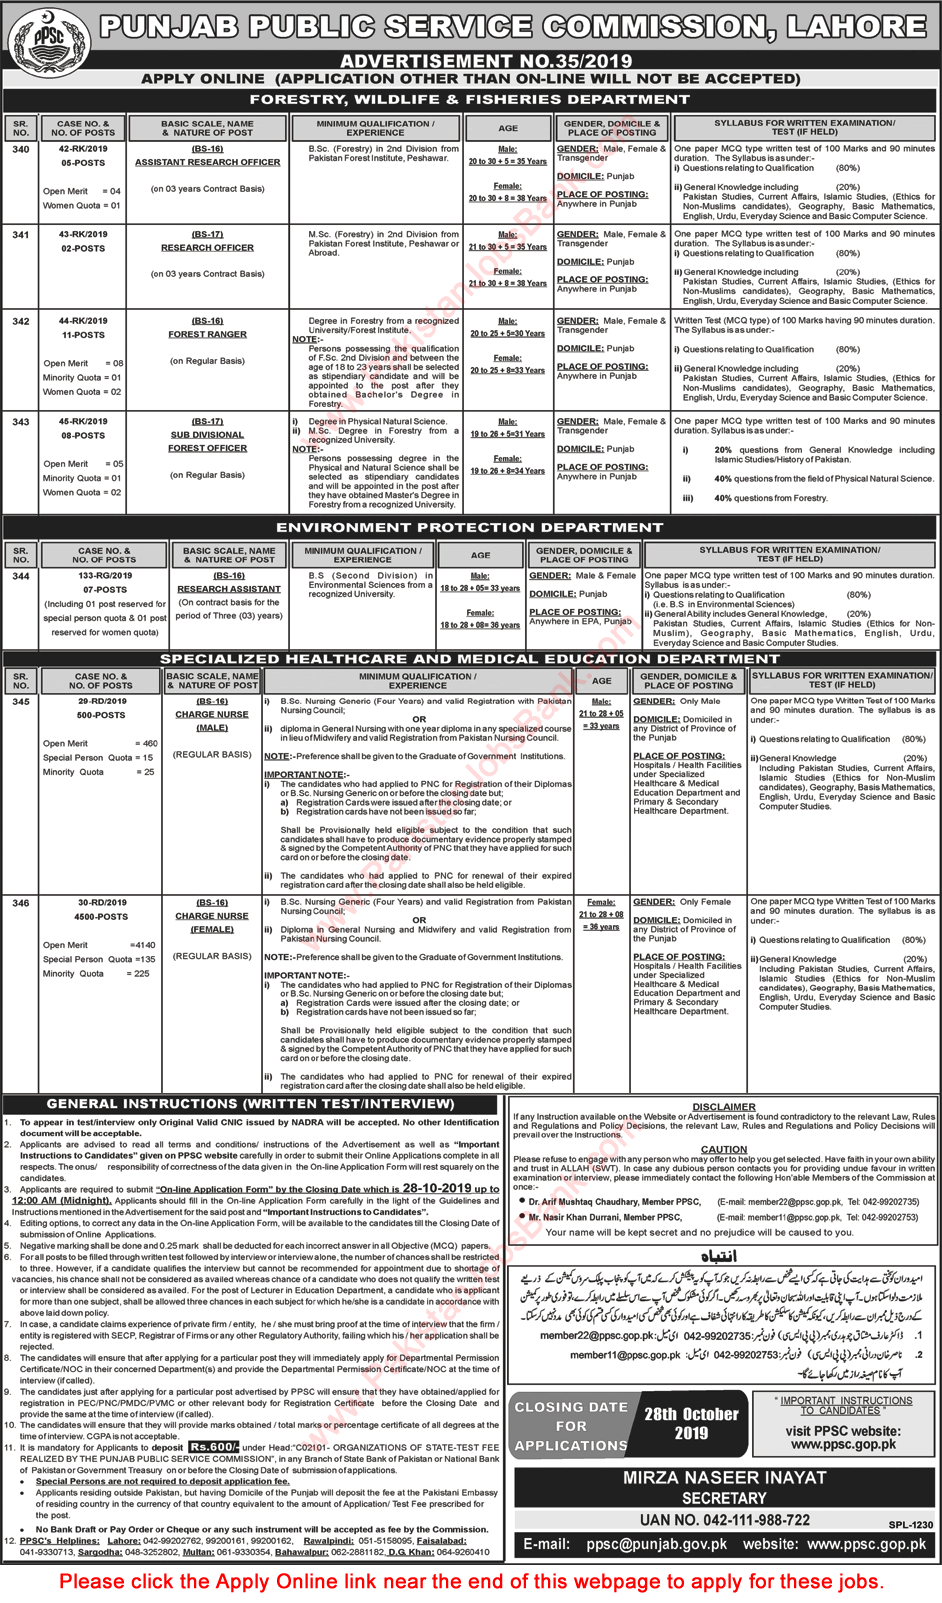 PPSC Jobs October 2019 Apply Online Consolidated Advertisement No 35/2019 Latest